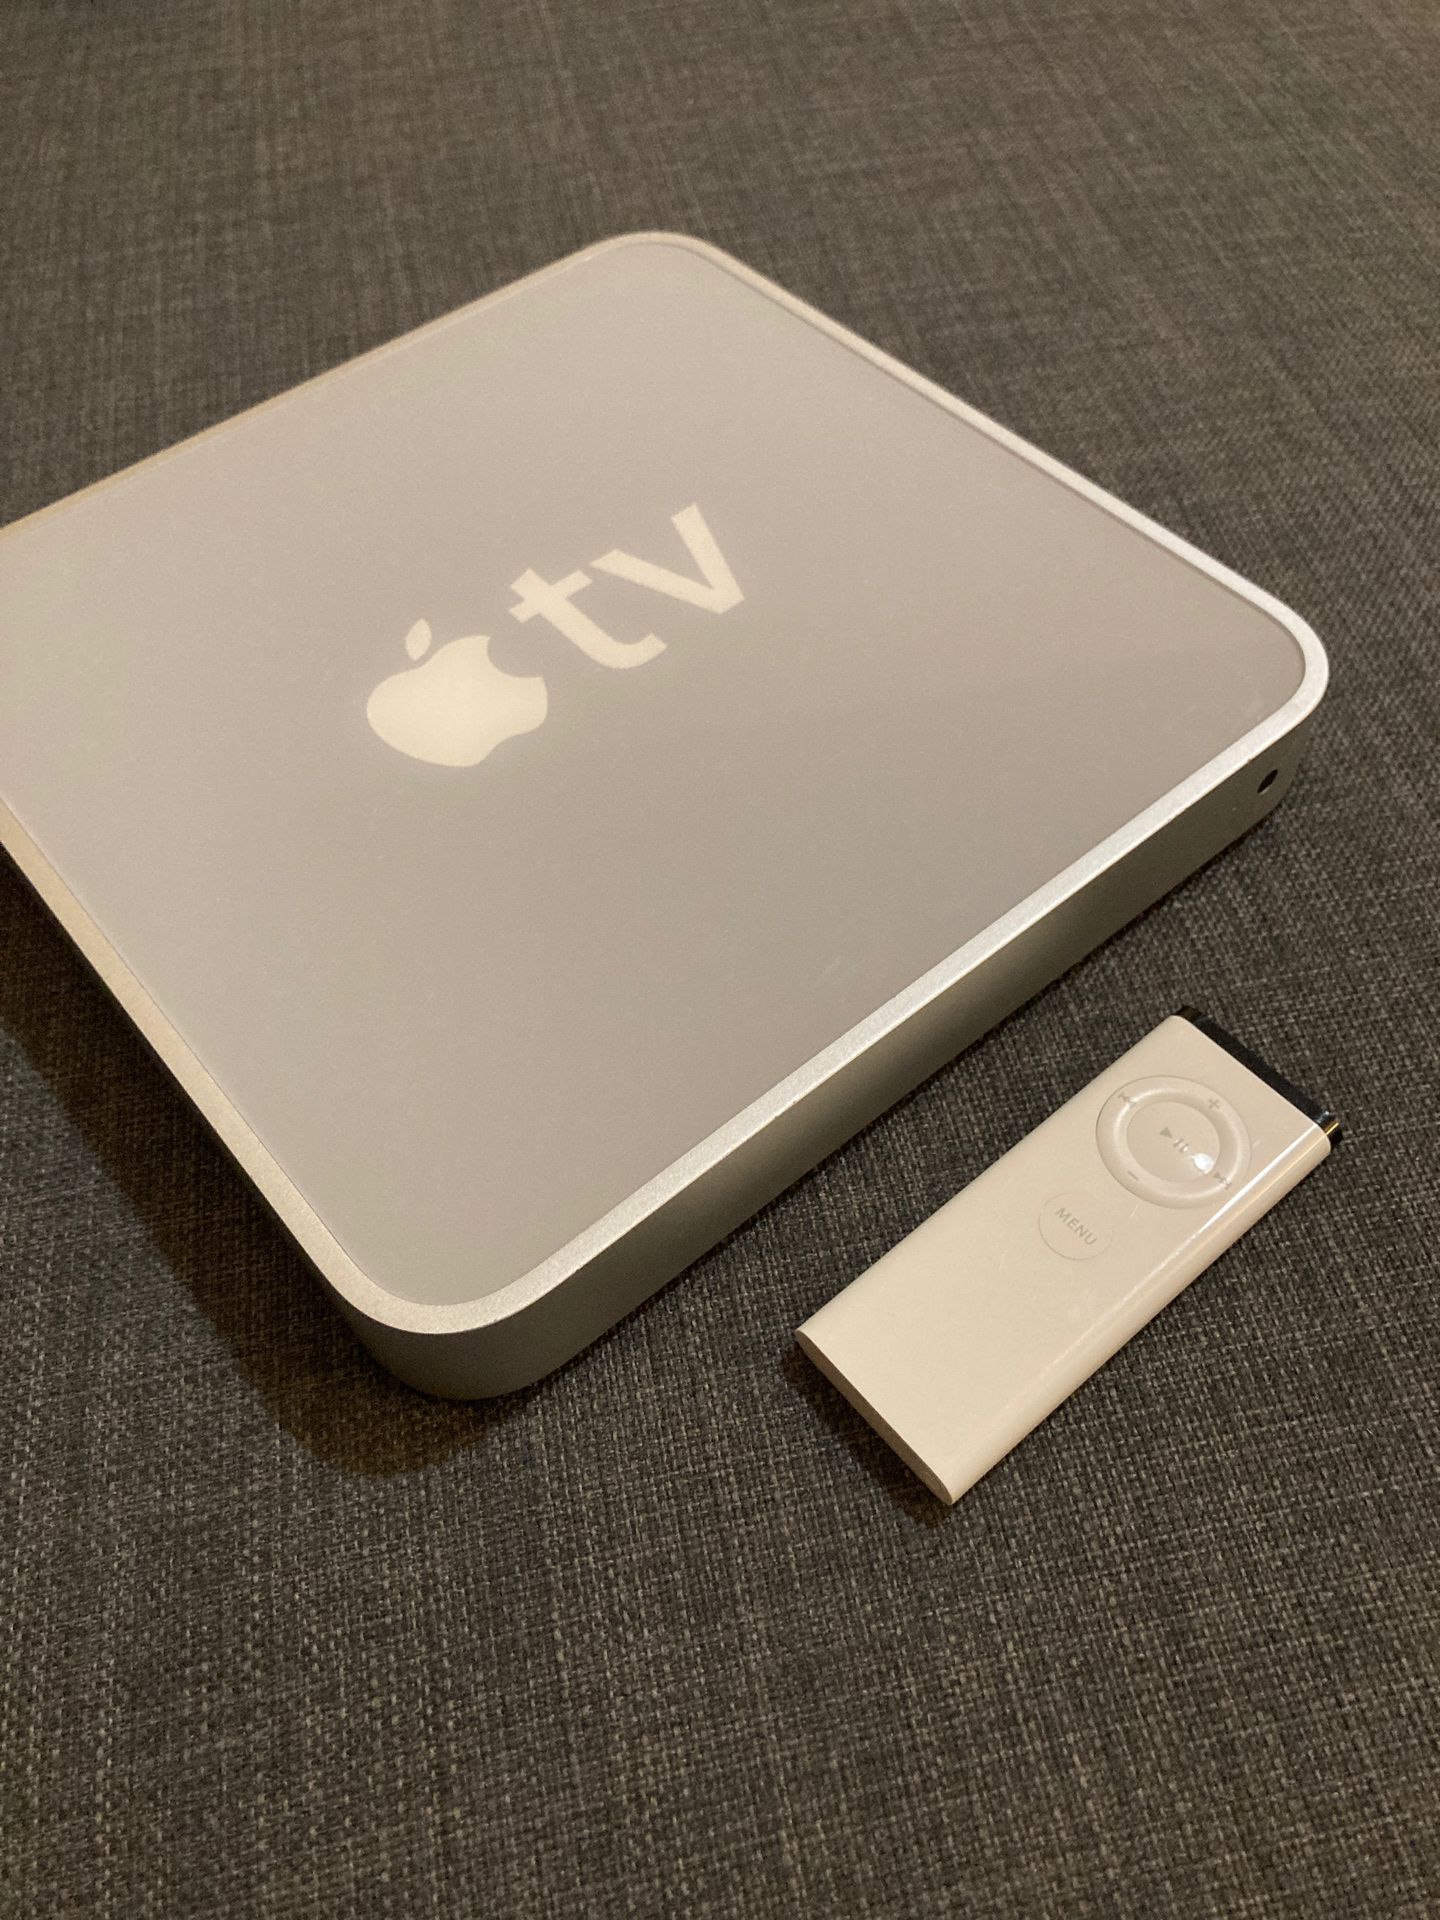 Apple TV 1 with remote and cables